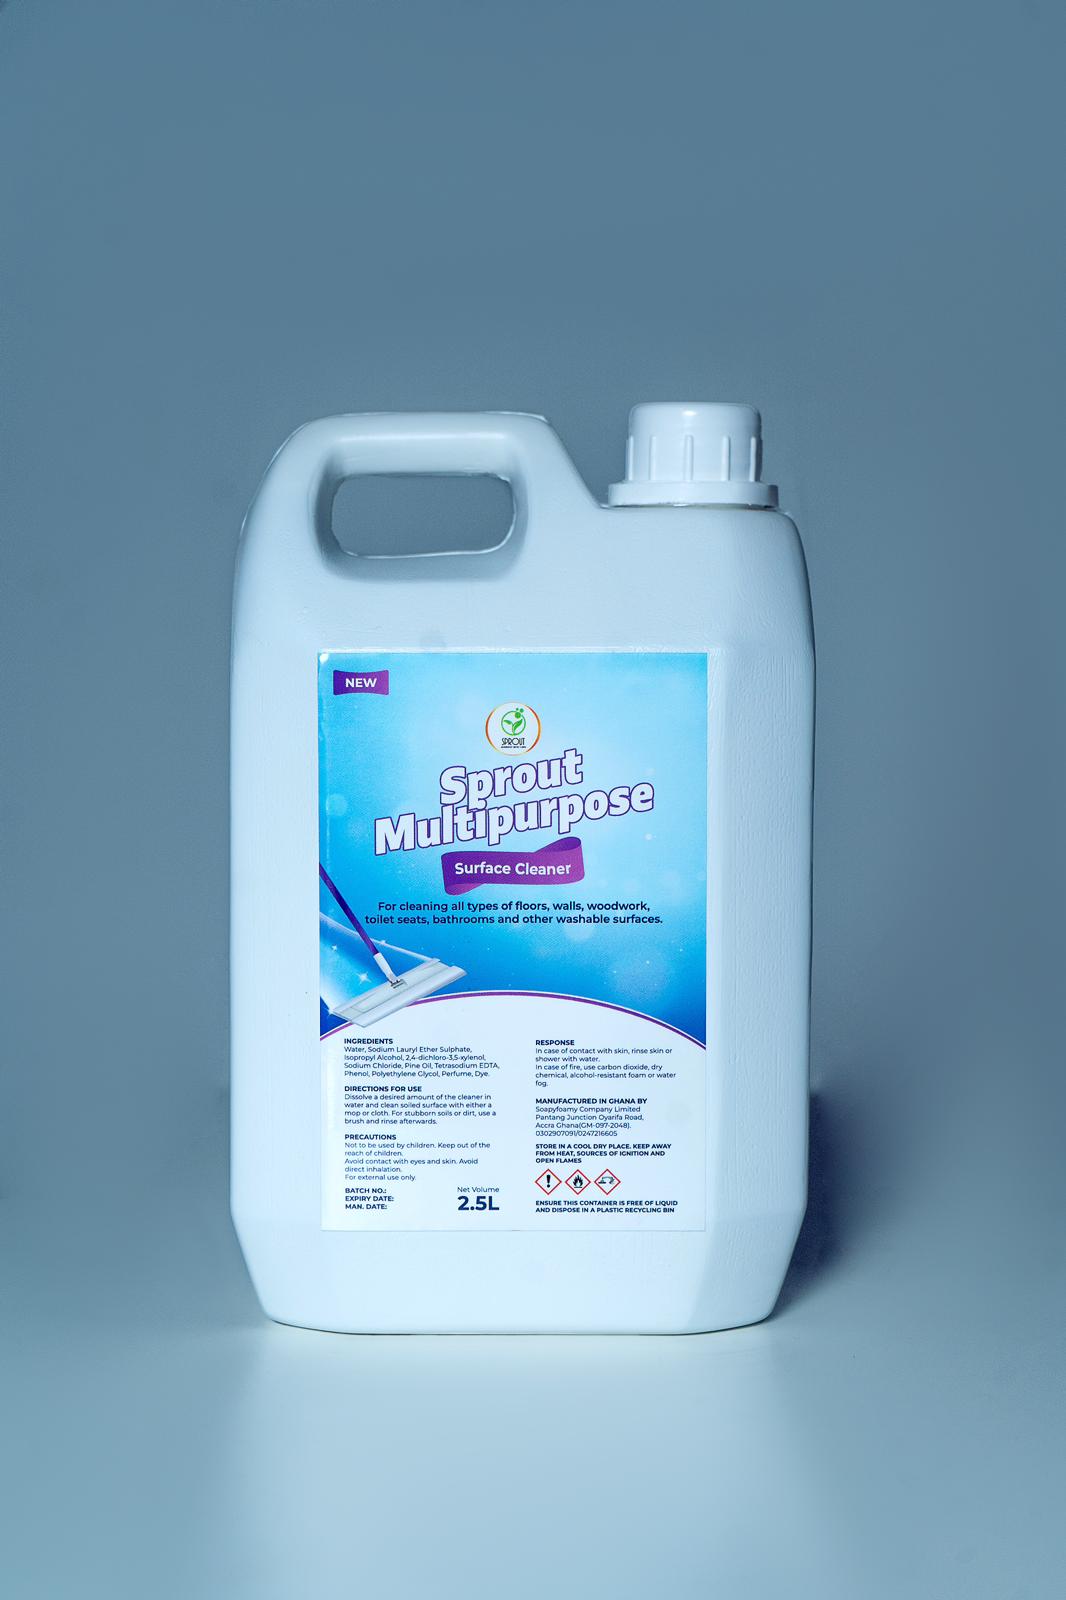 Sprout Multipurpose (Surface Cleaner) 5L image